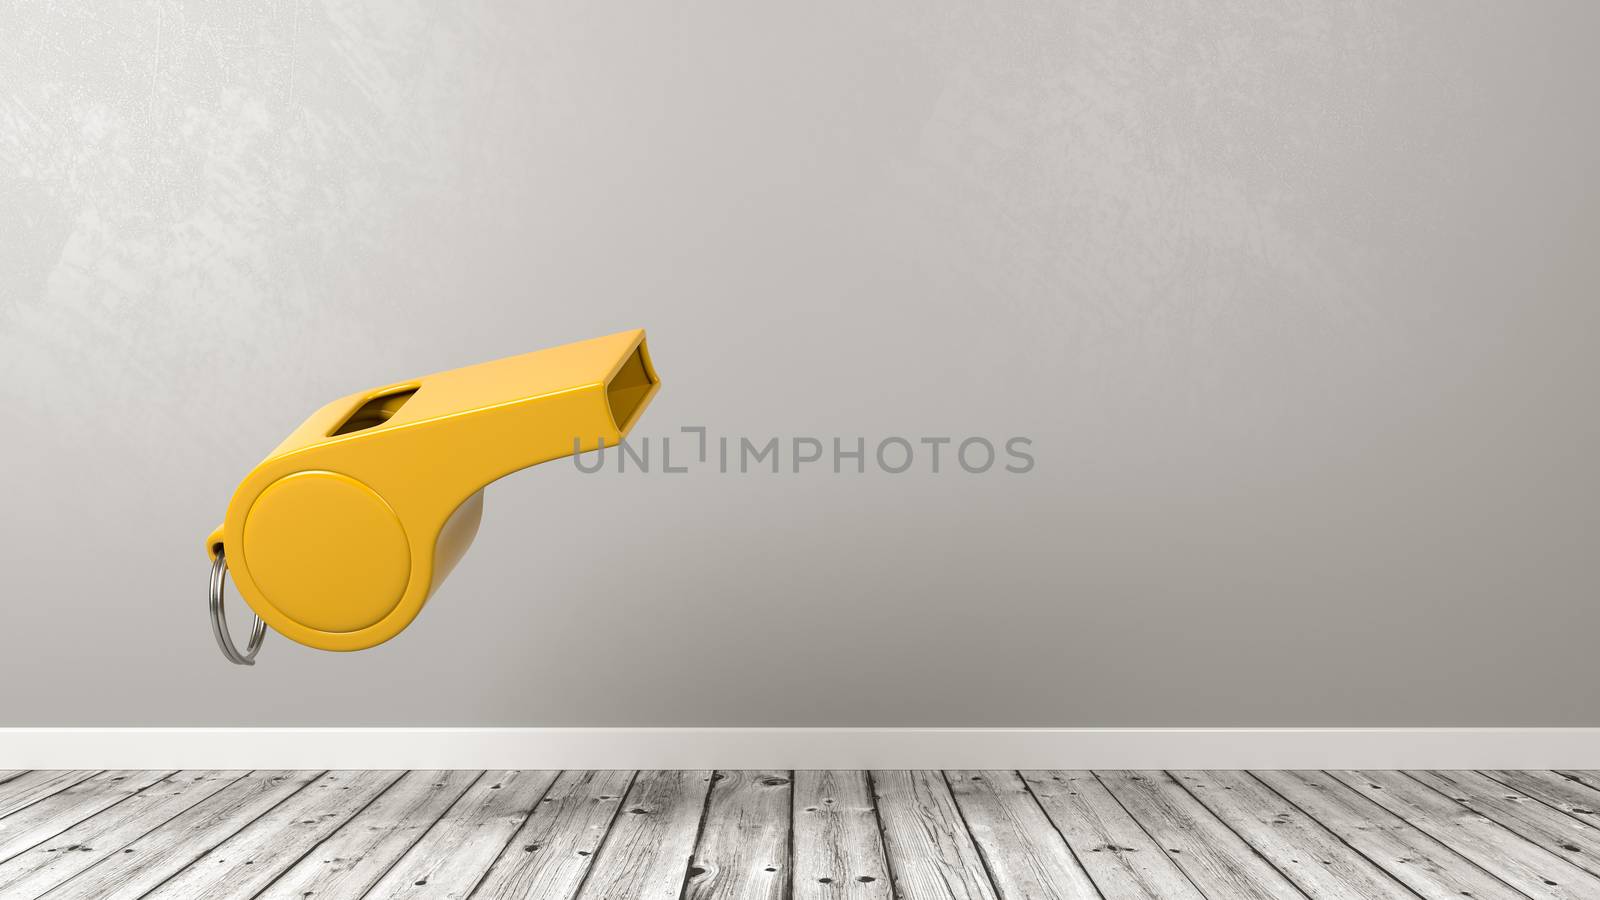 One Yellow Plastic Whistle in a Wooden Floor Room with Gray Wall with Copy Space 3D Illustration